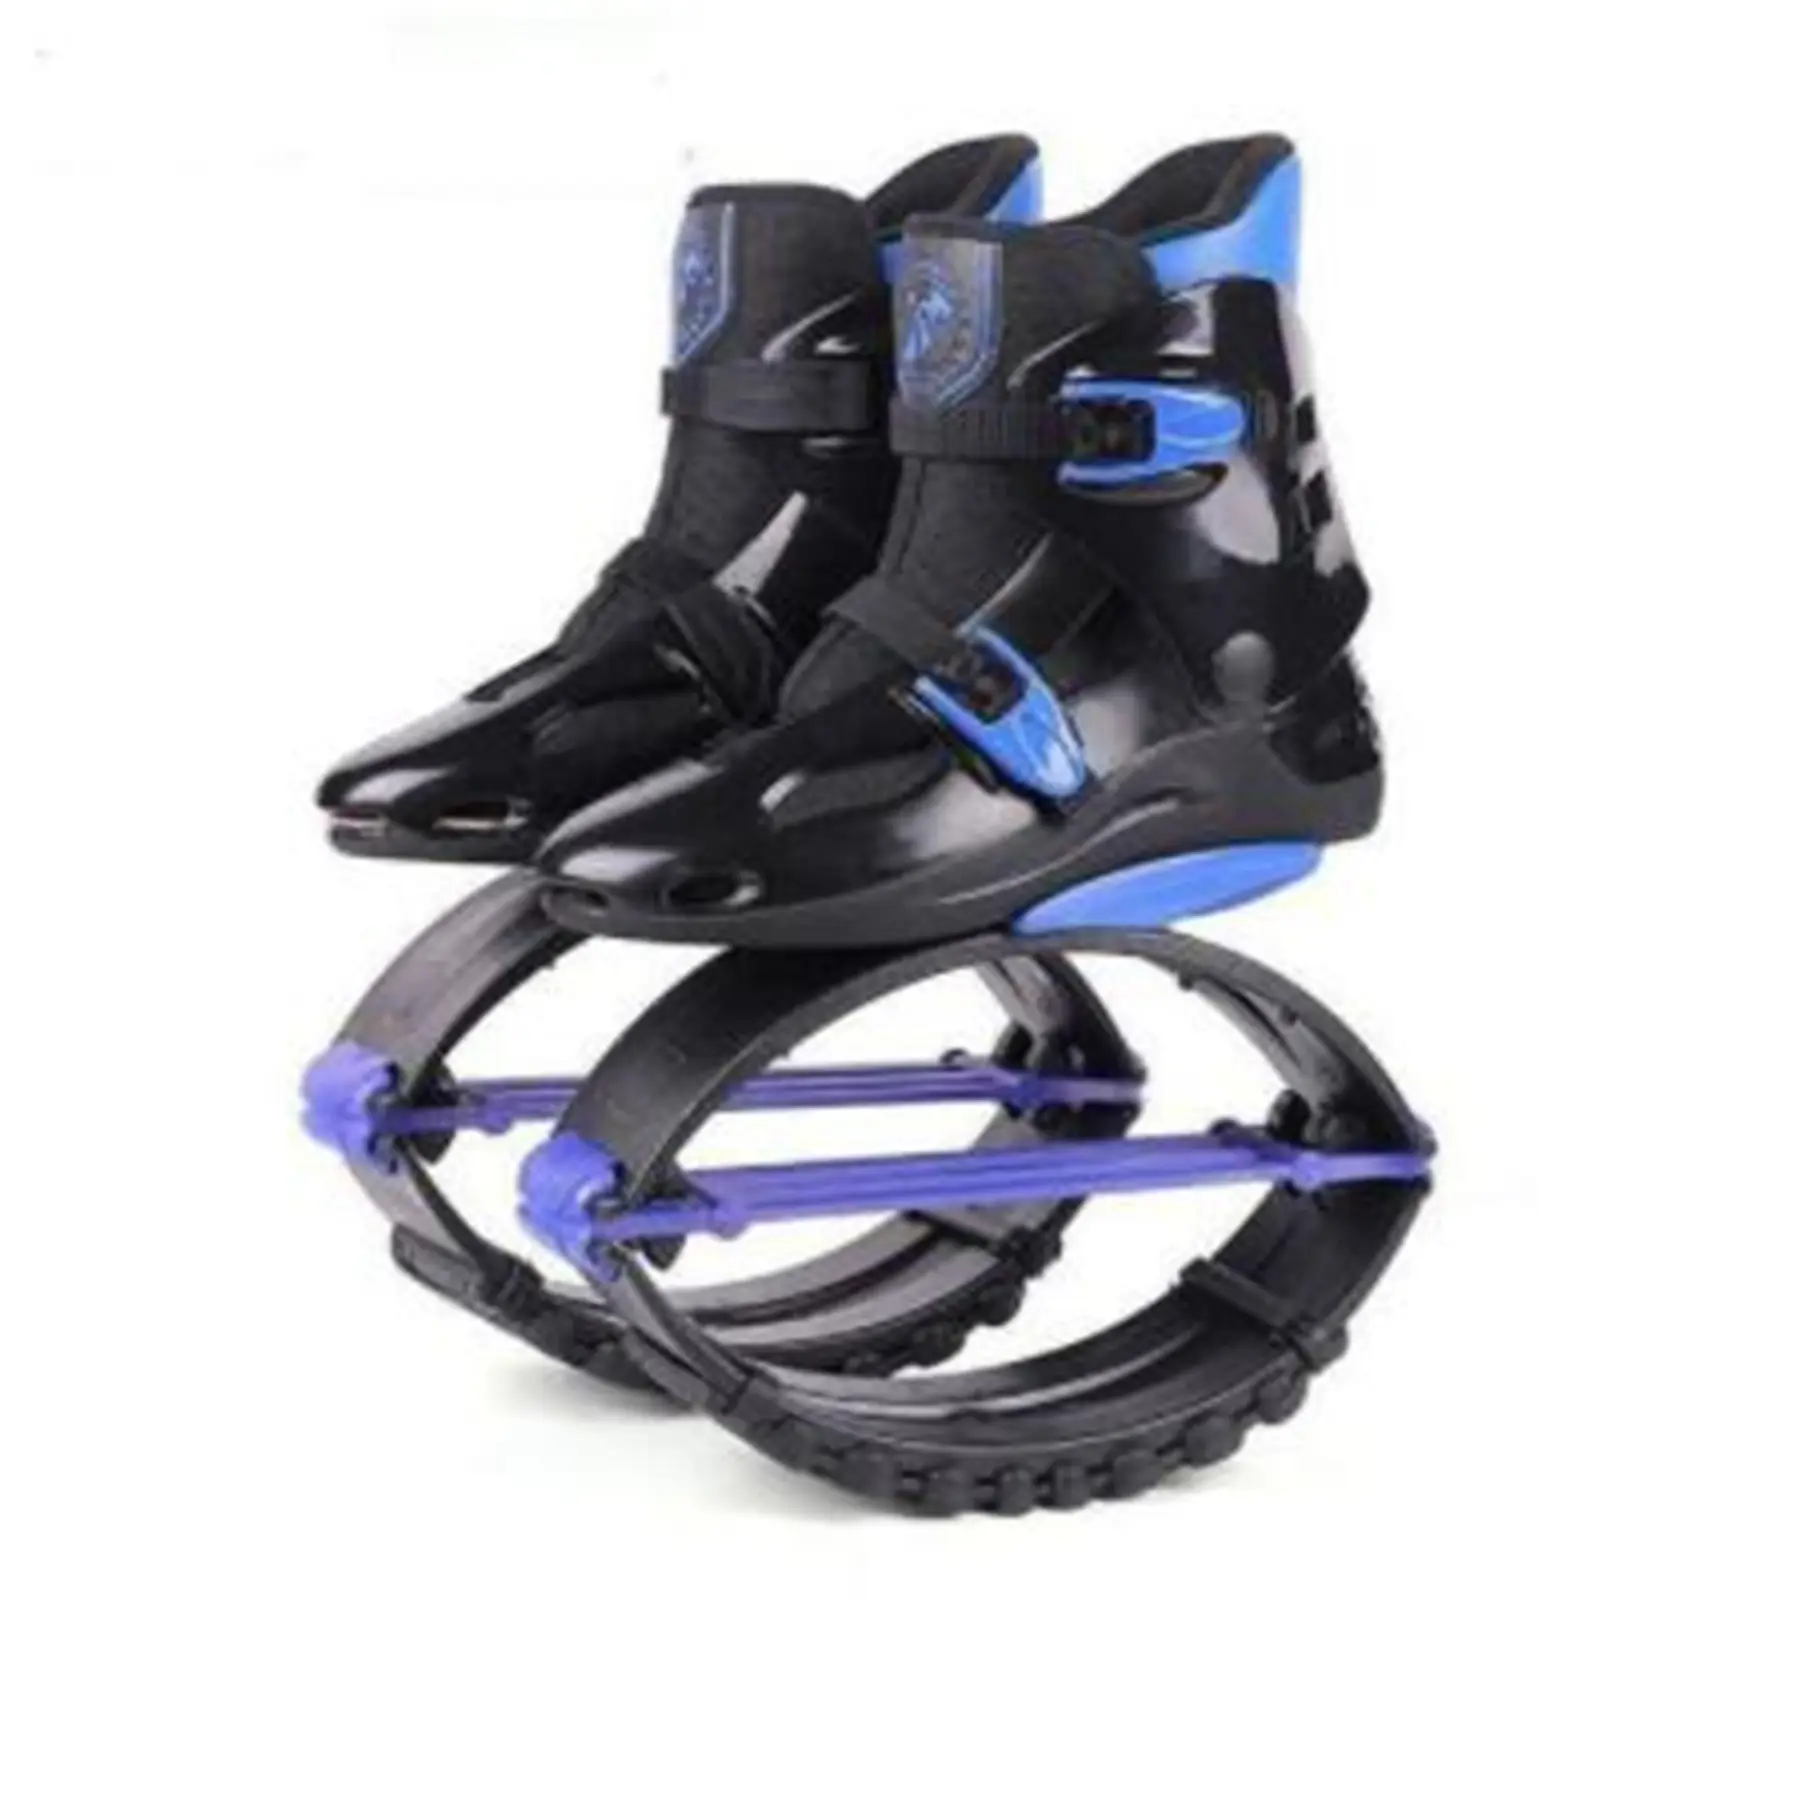 Non-slip massage spring rebound function shoes Other Functional Shoes